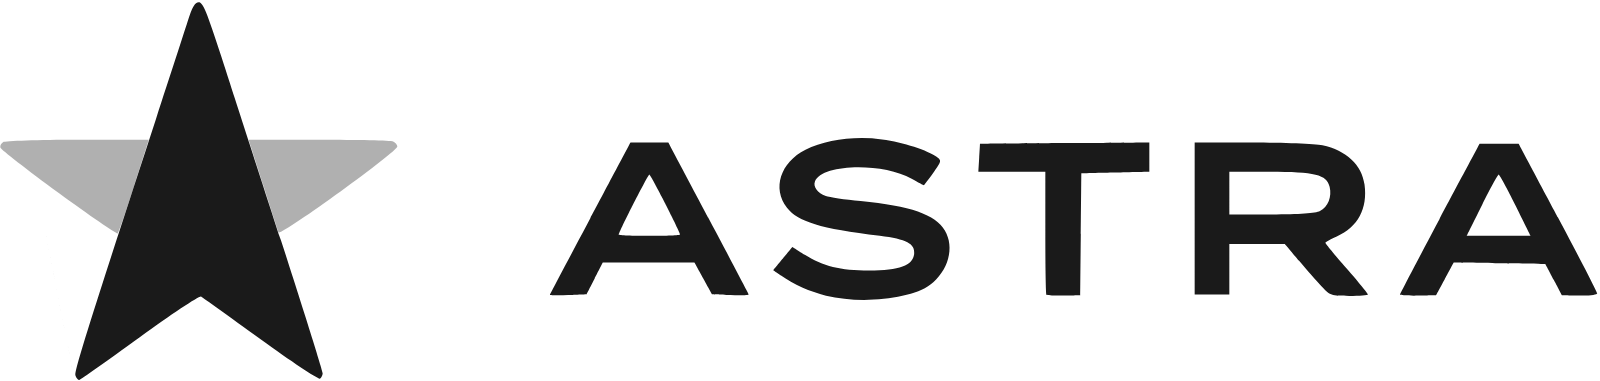 Astra Space logo large (transparent PNG)